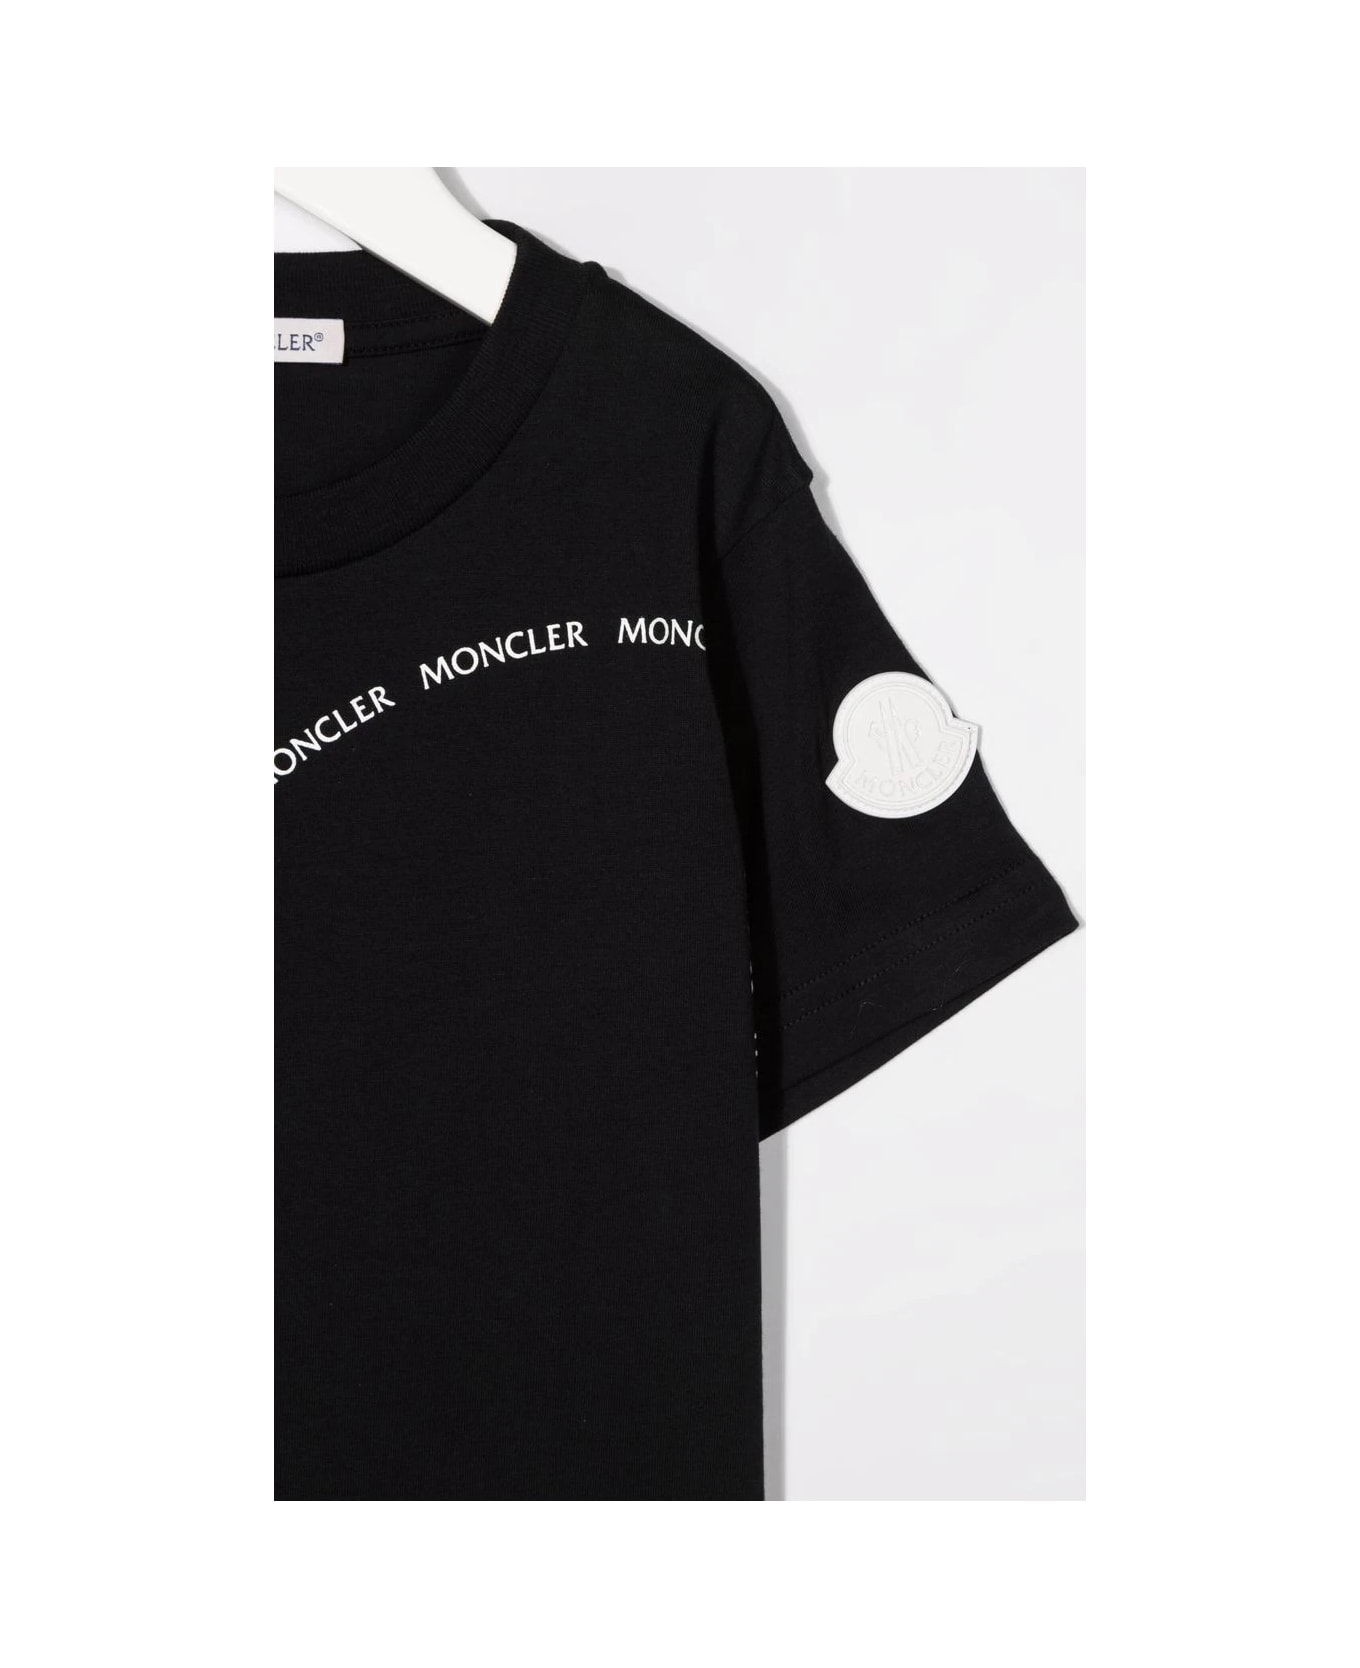 Moncler Black T-shirt With Embroidered Logo Tシャツ＆ポロシャツ